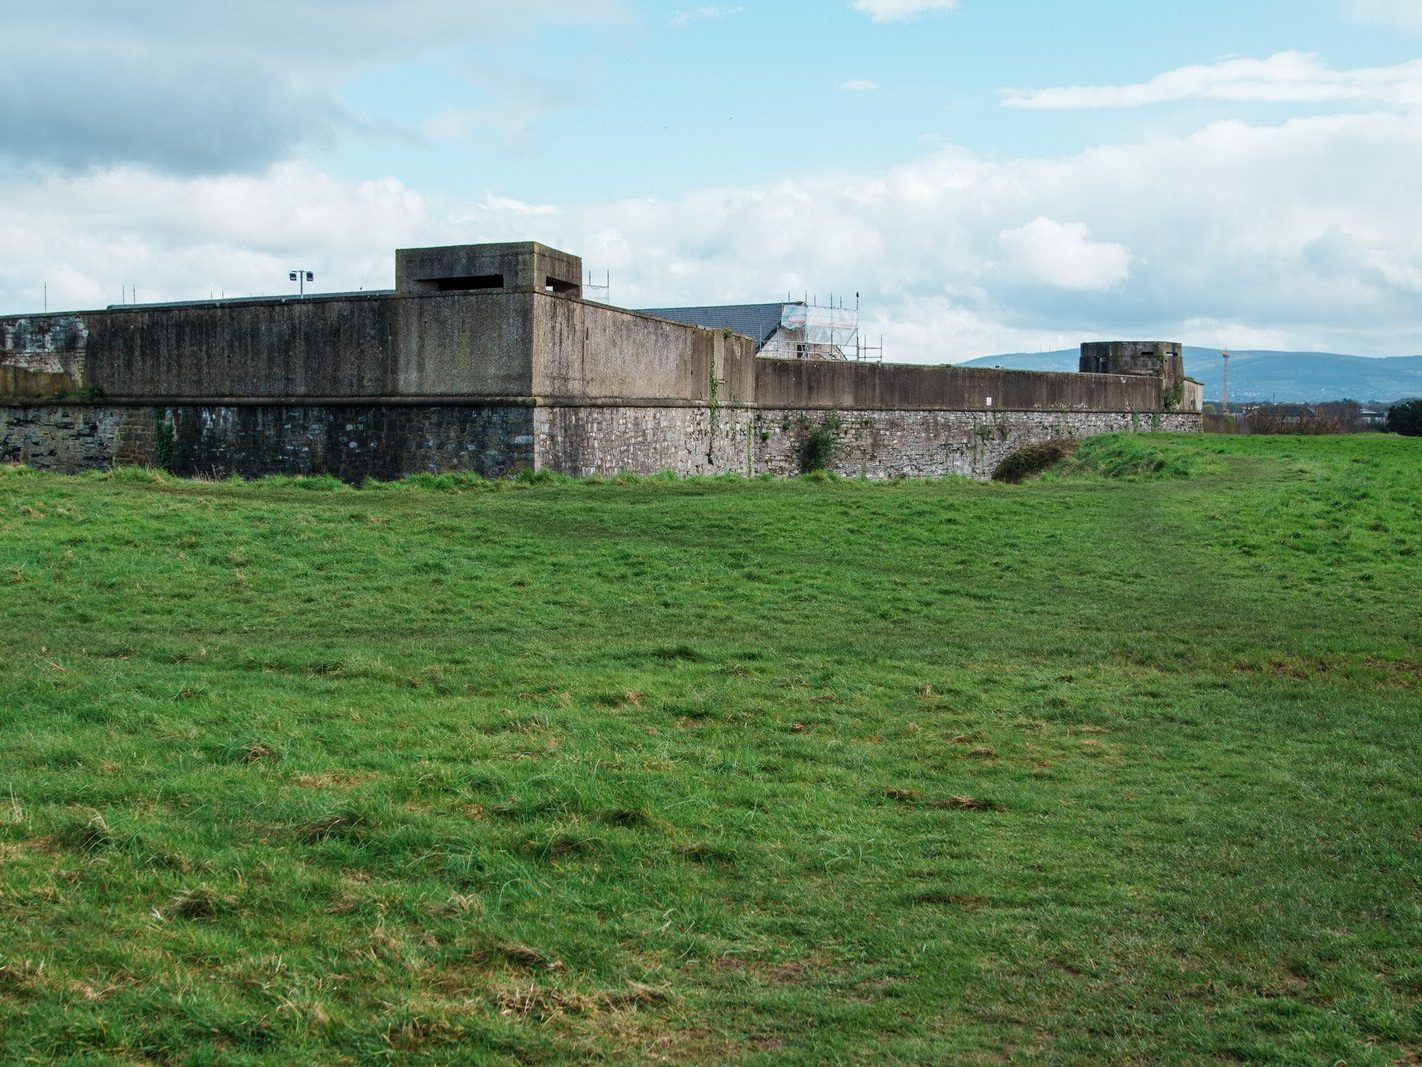 THE MAGAZINE FORT IN PHOENIX PARK [THERE IS MUCH INFORMATION AND A COMPLICATED STORY]-223478-1